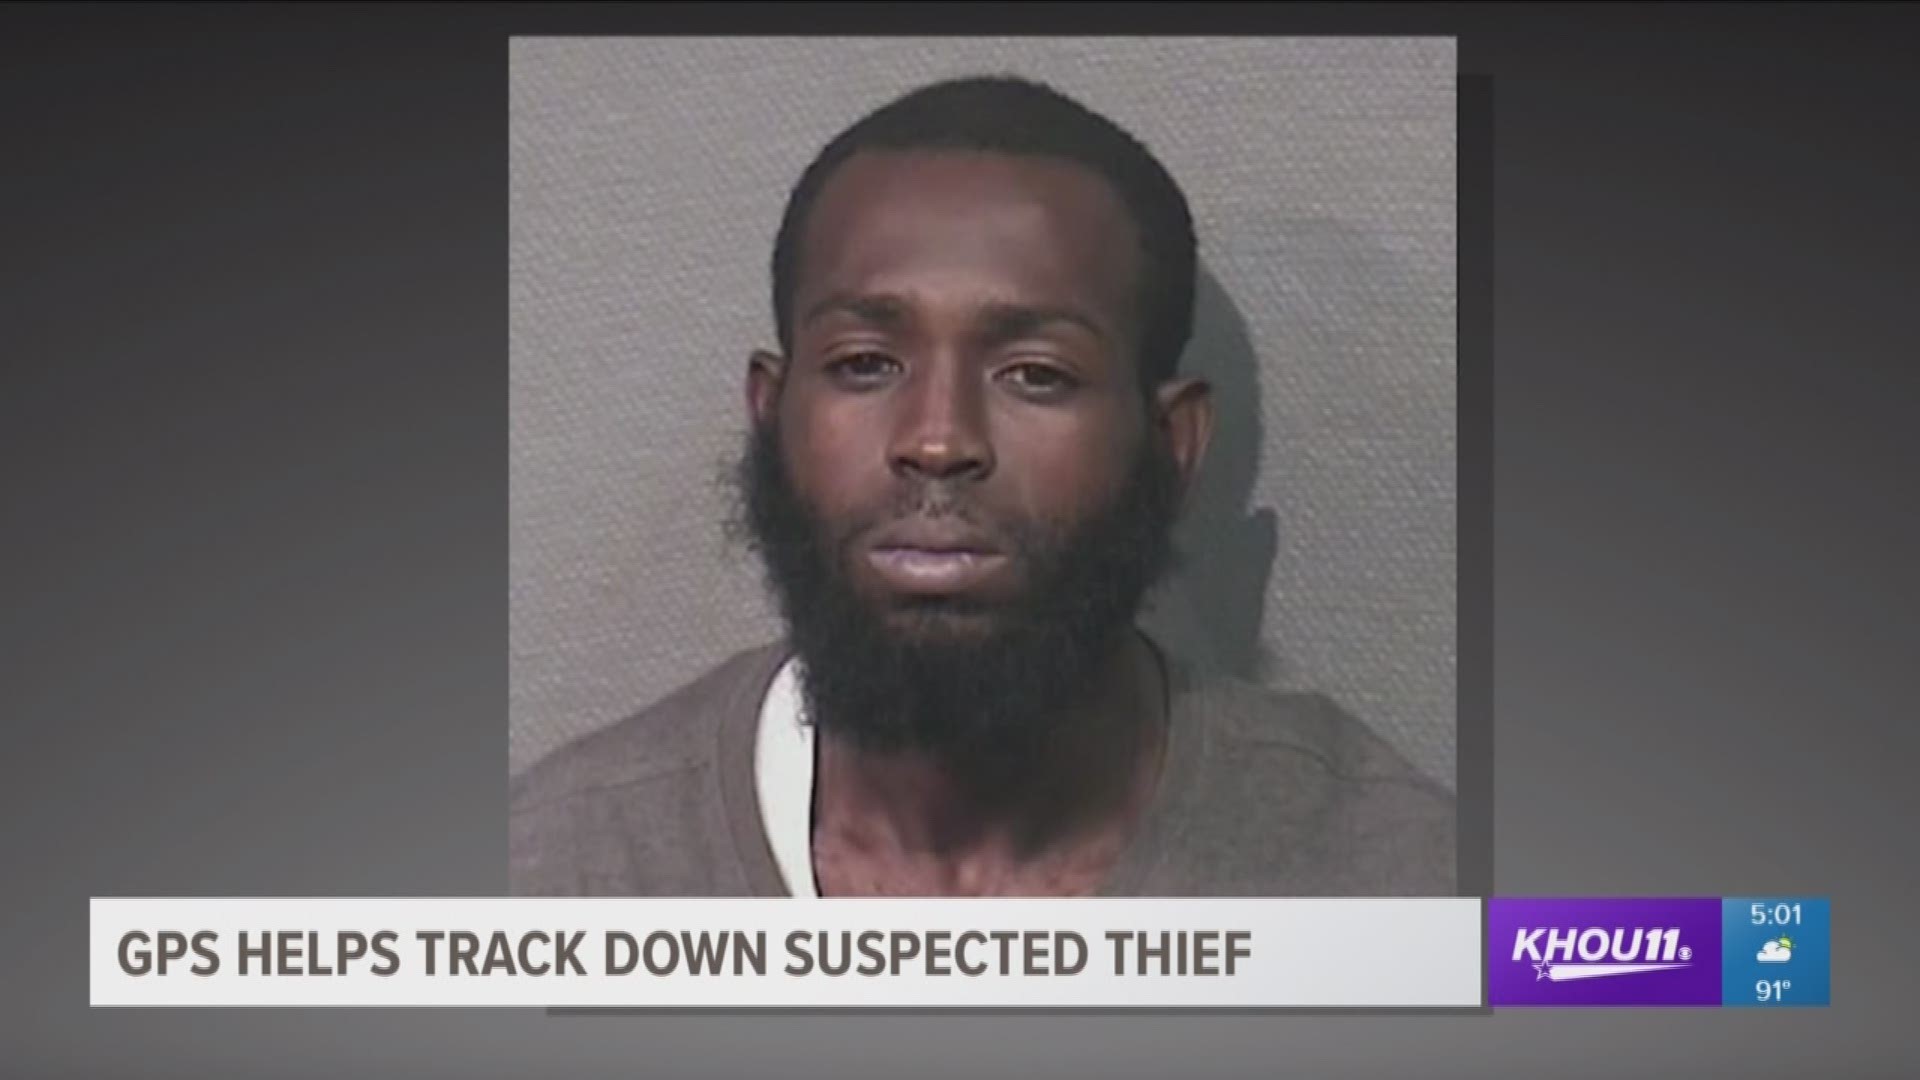 A man is accused of robbing landscapers on the job, a couple's fight leads to a deadly crash and more top stories on KHOU 11 News at 5 p.m. for Aug. 13, 2018.